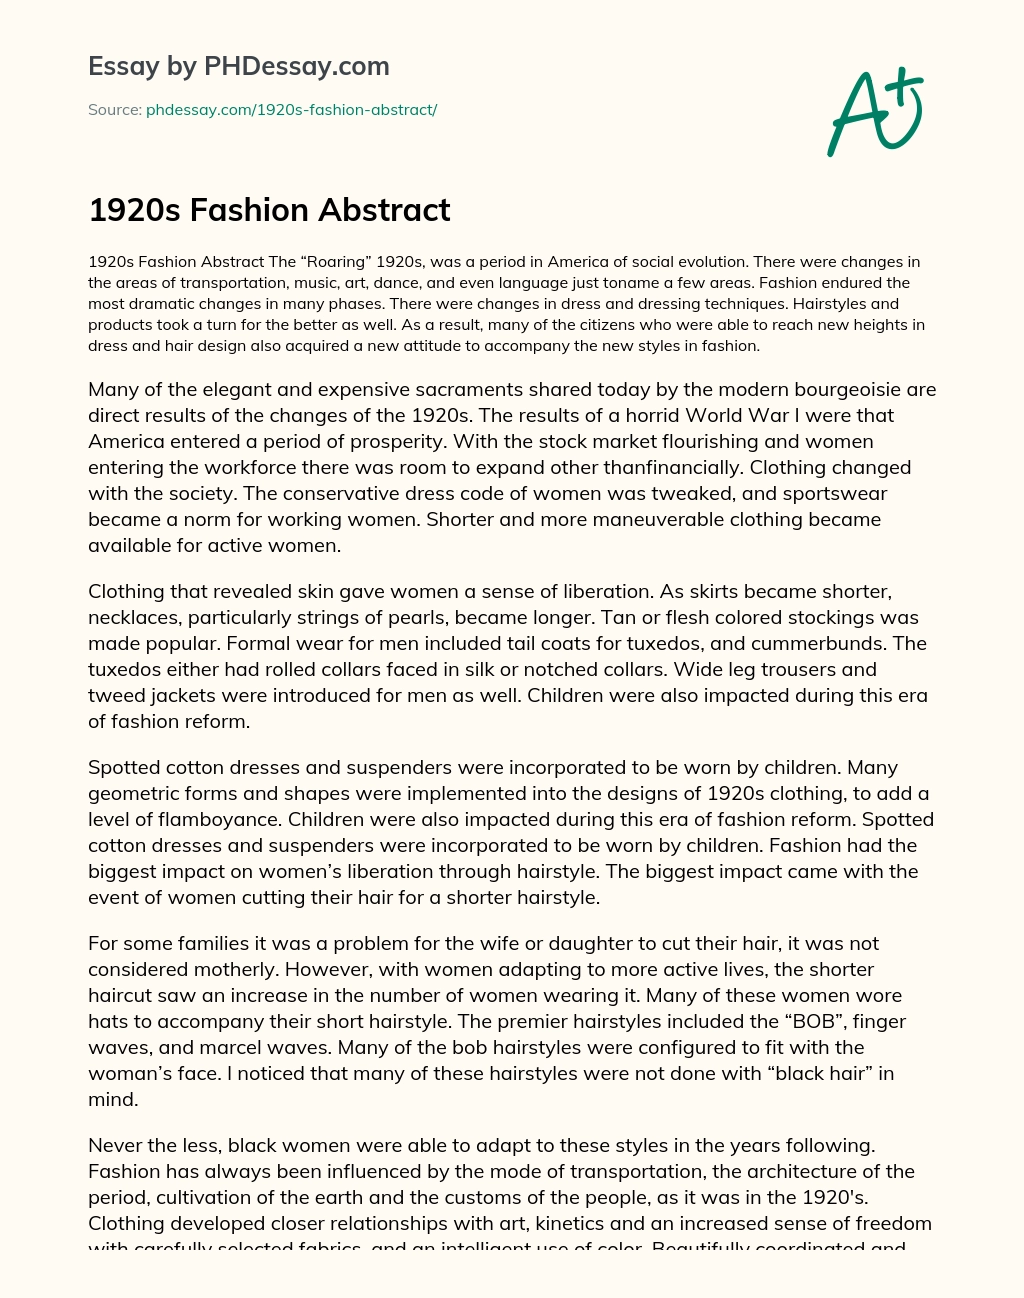 1920s Fashion Abstract essay